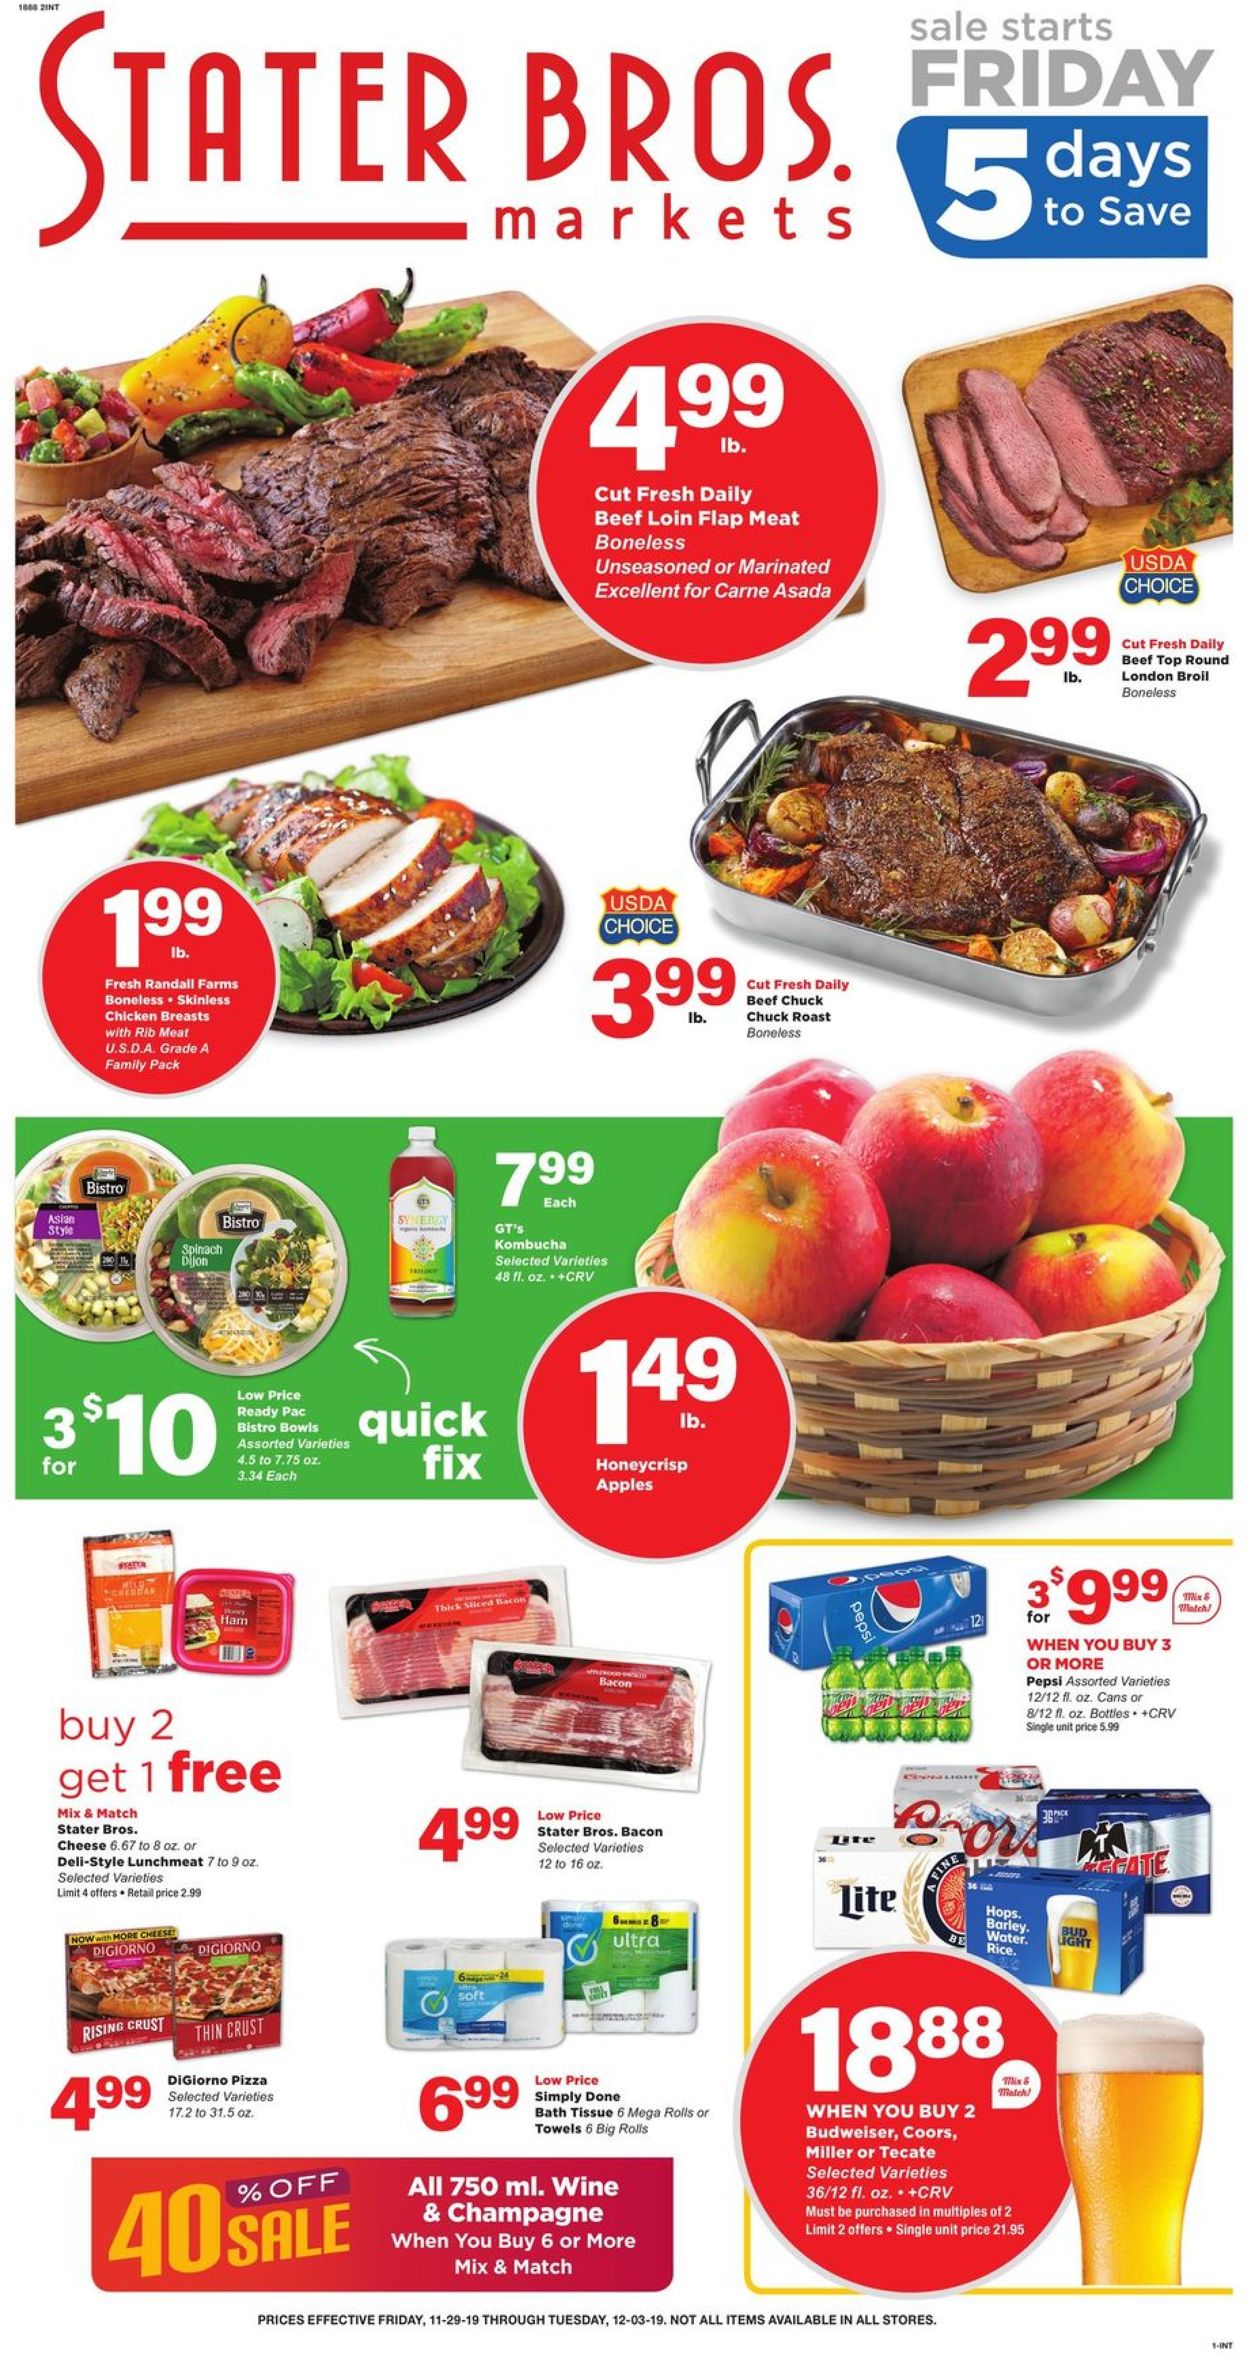 Stater Bros. Current weekly ad 11/29 12/03/2019